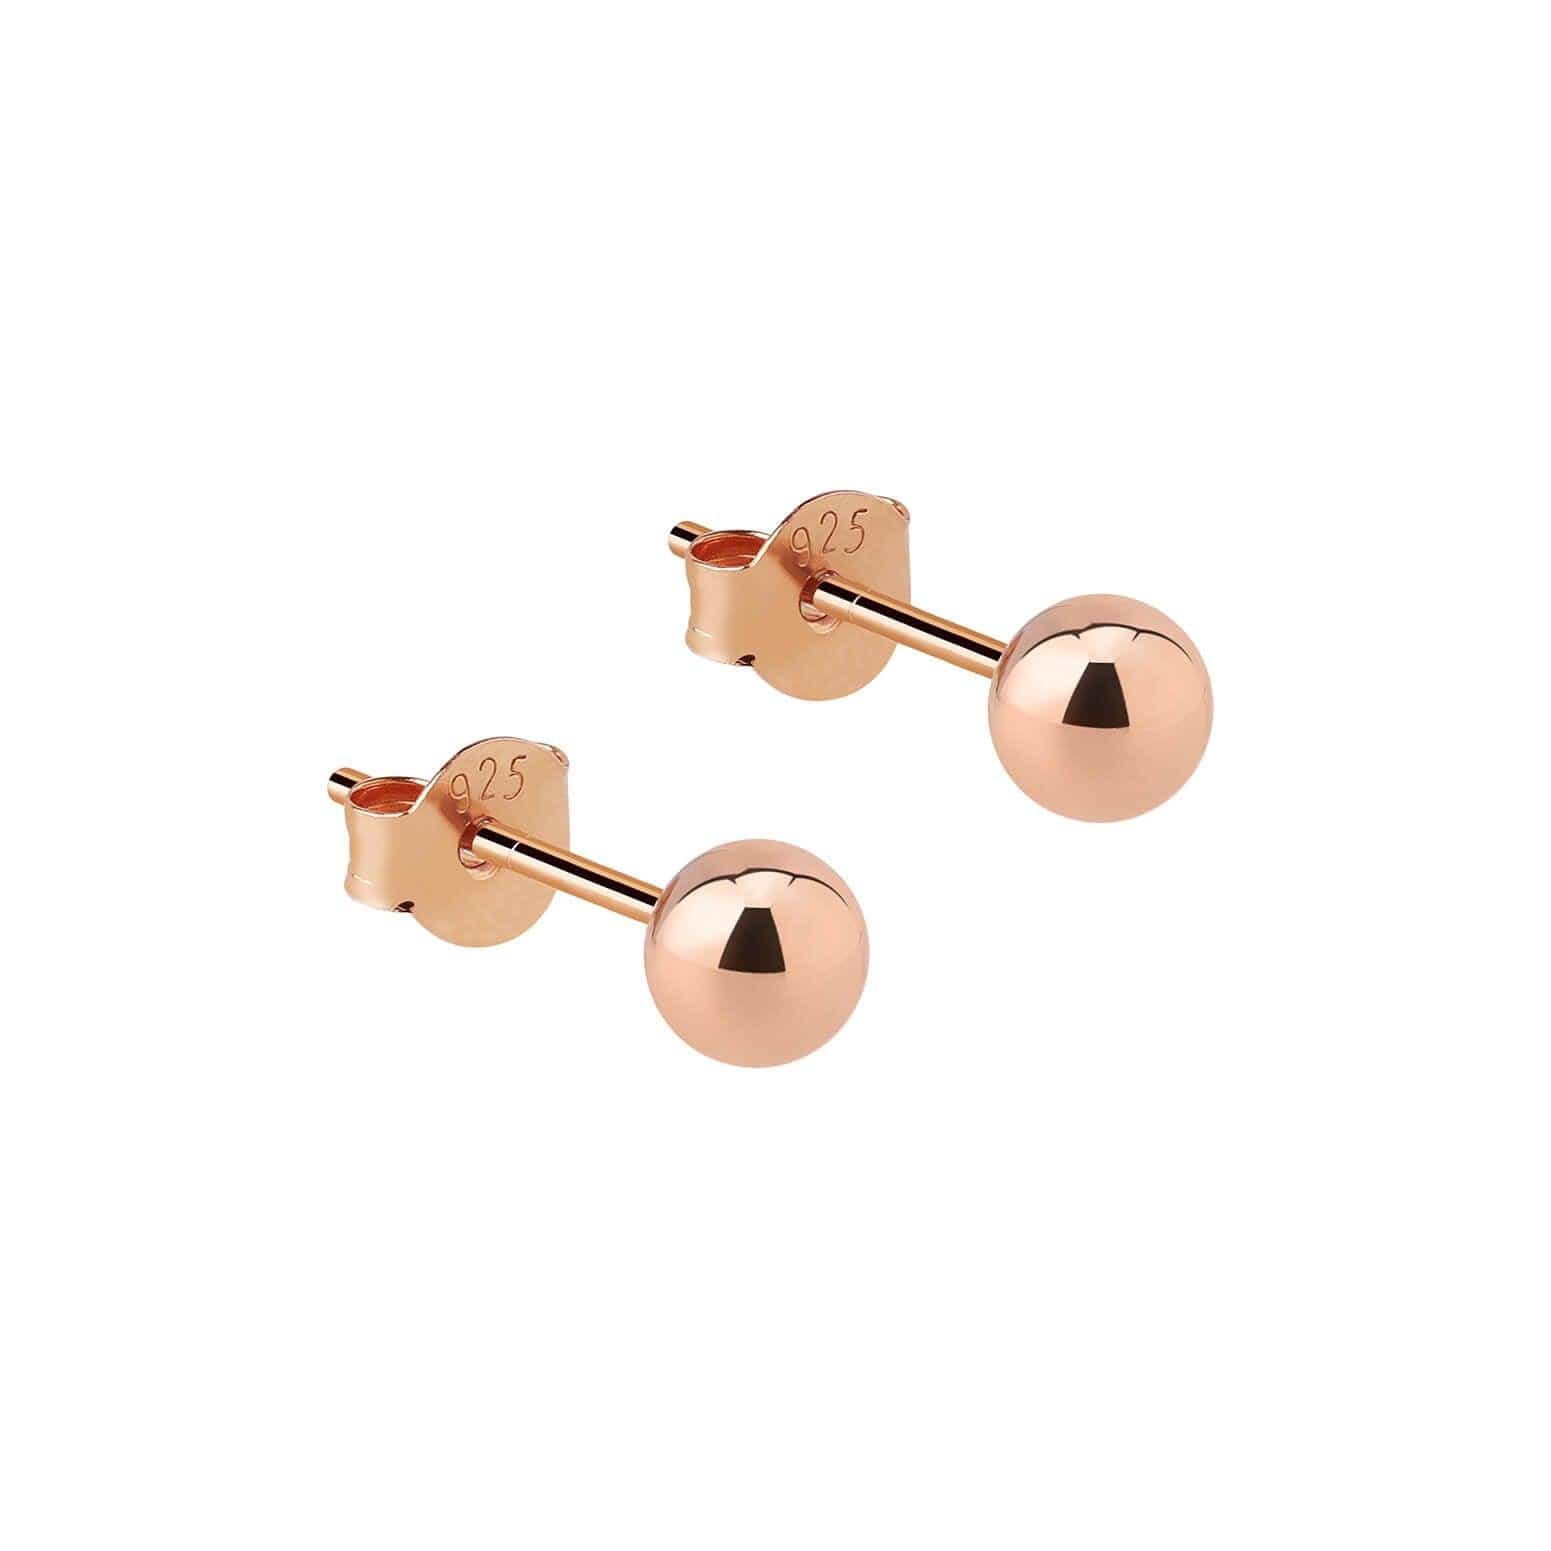 4mm classic stud earring rose gold plated